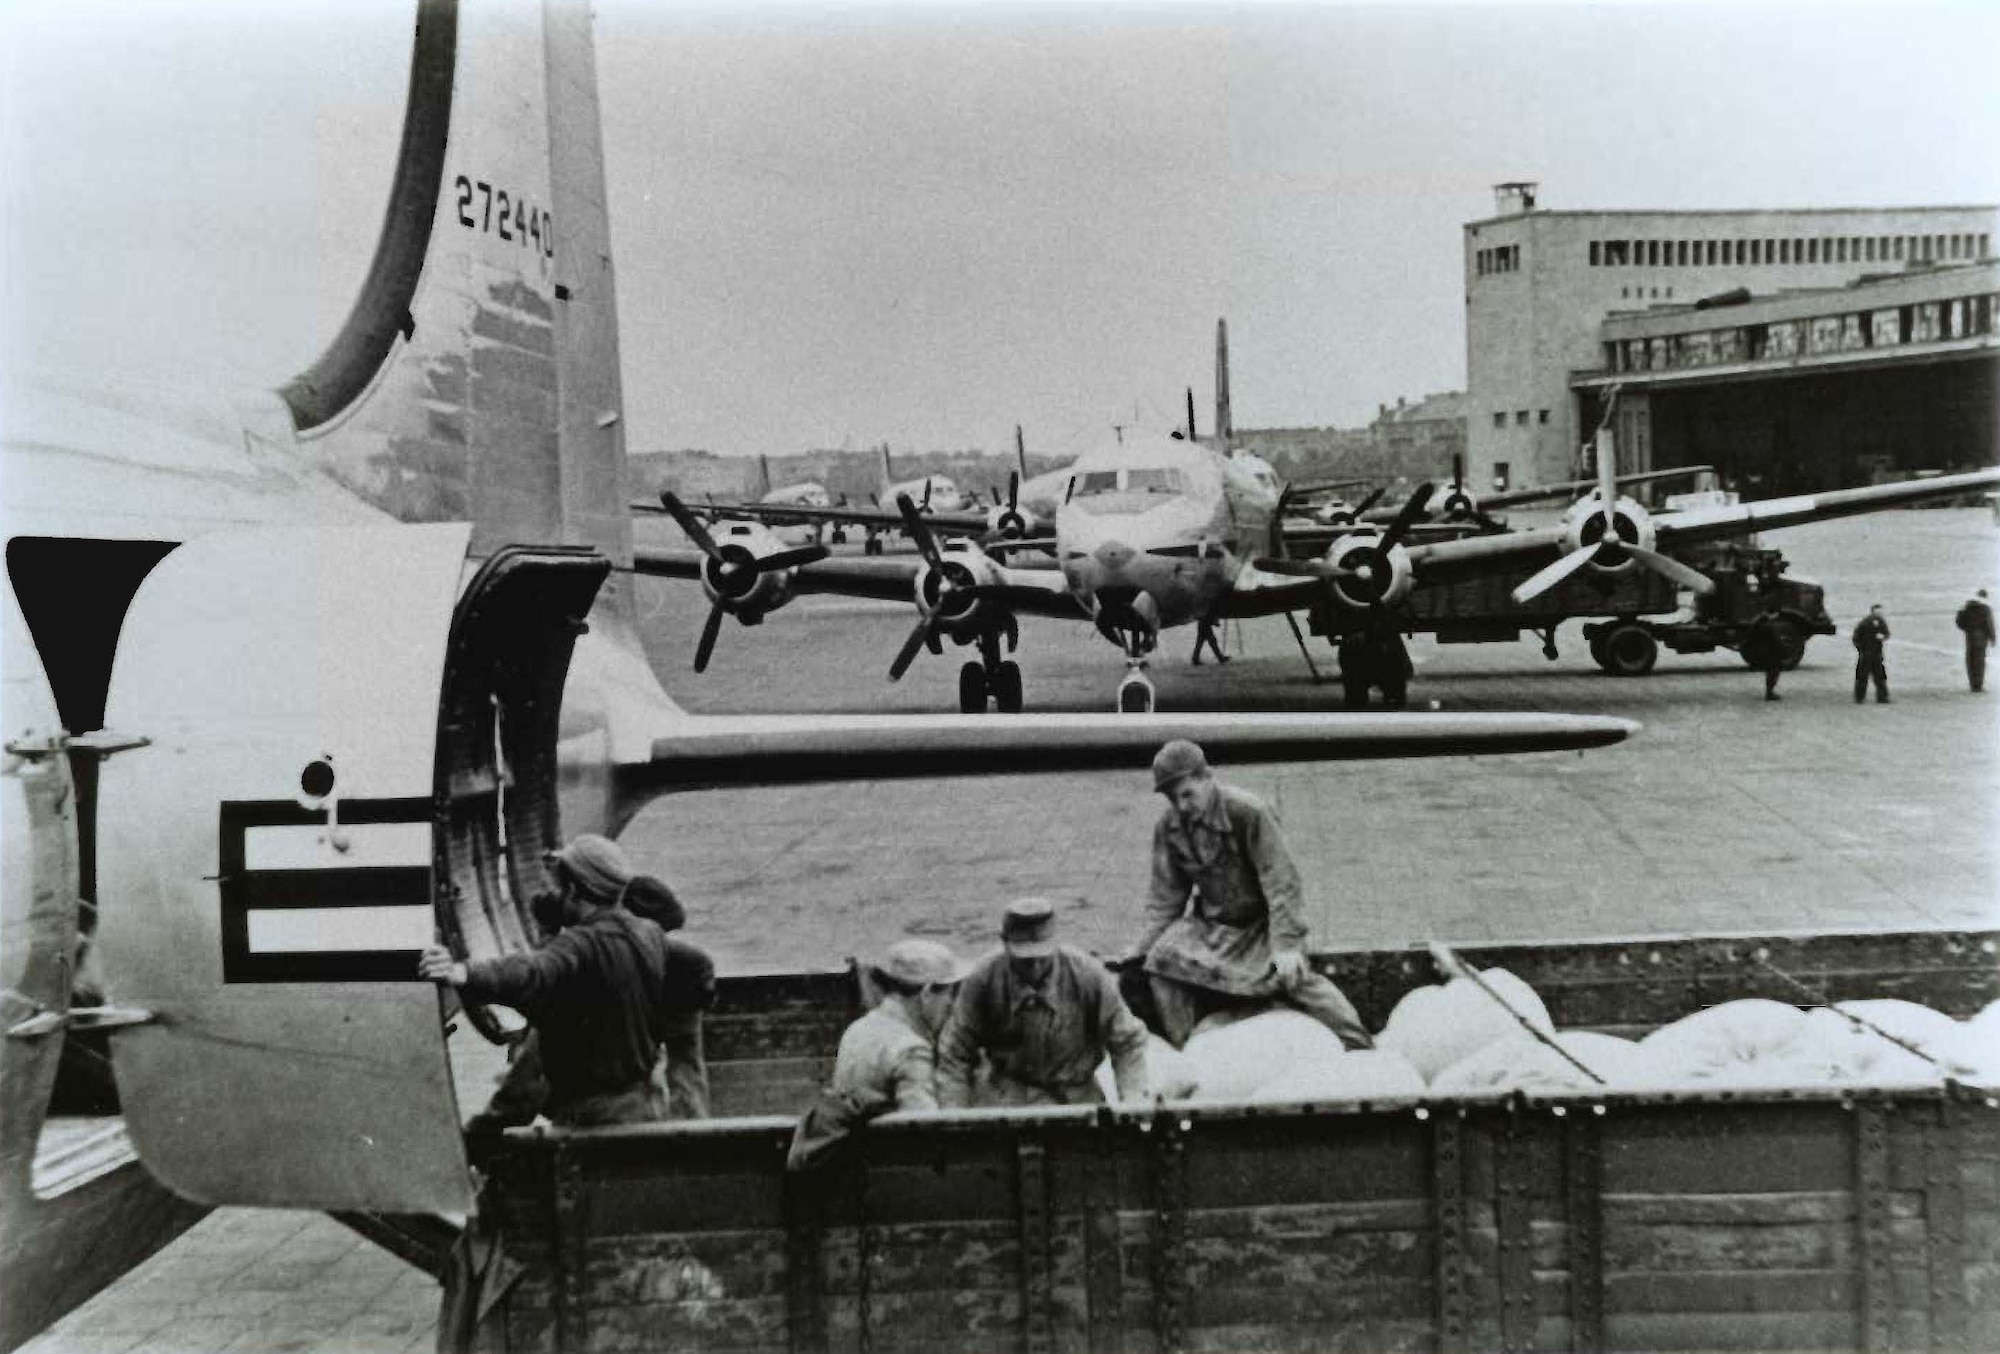 Unloading planes at Tempelhof airport during the Berlin Airlift